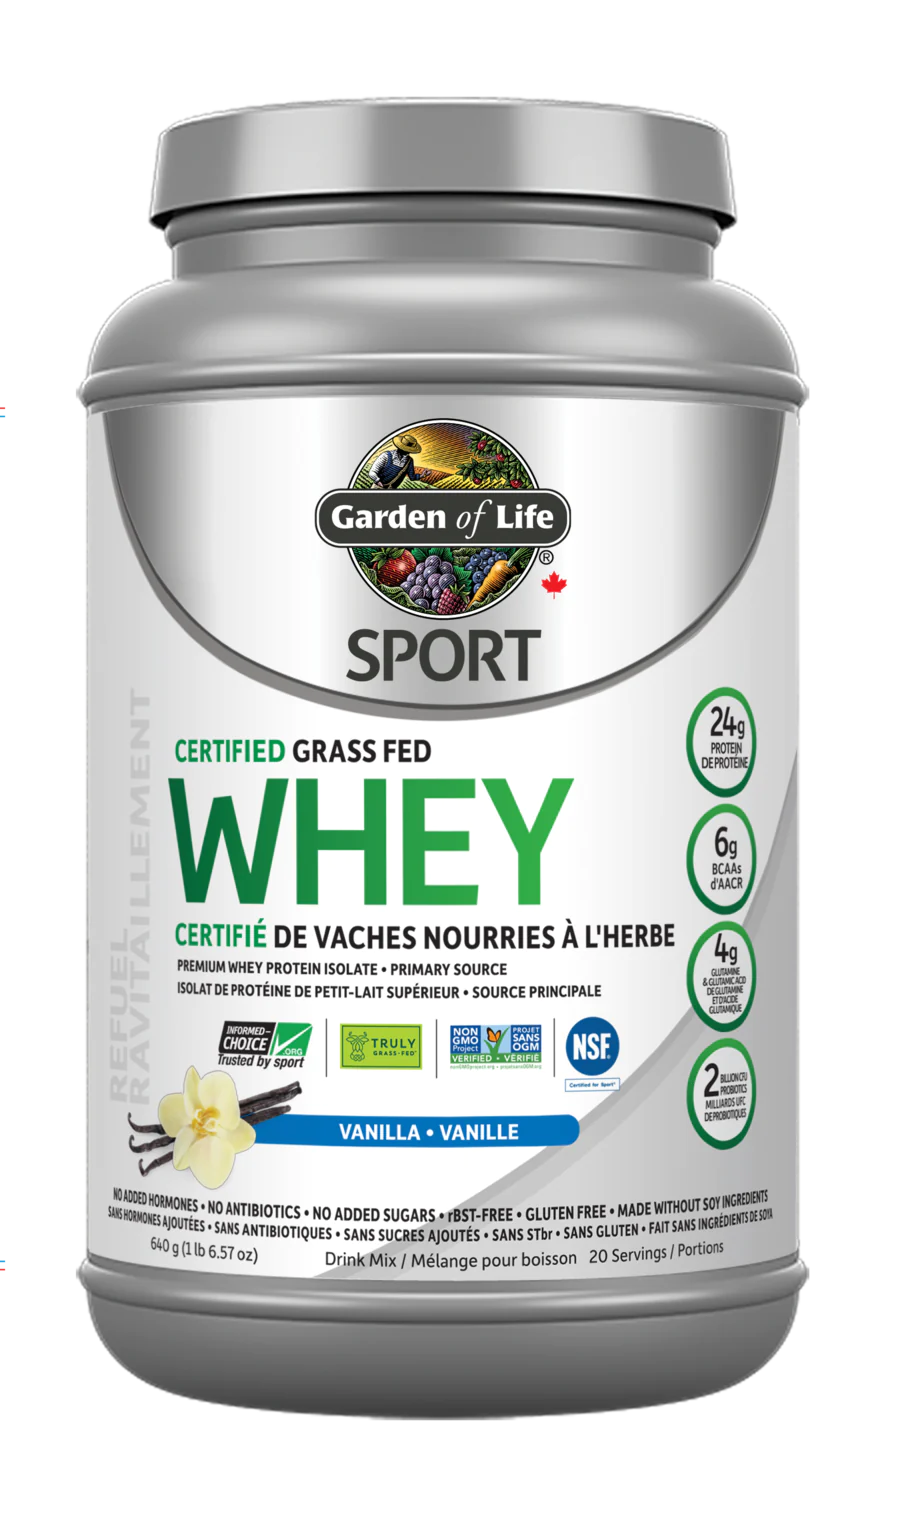 Garden of Life SPORT Certified Grass Fed Whey (Flavour Options)